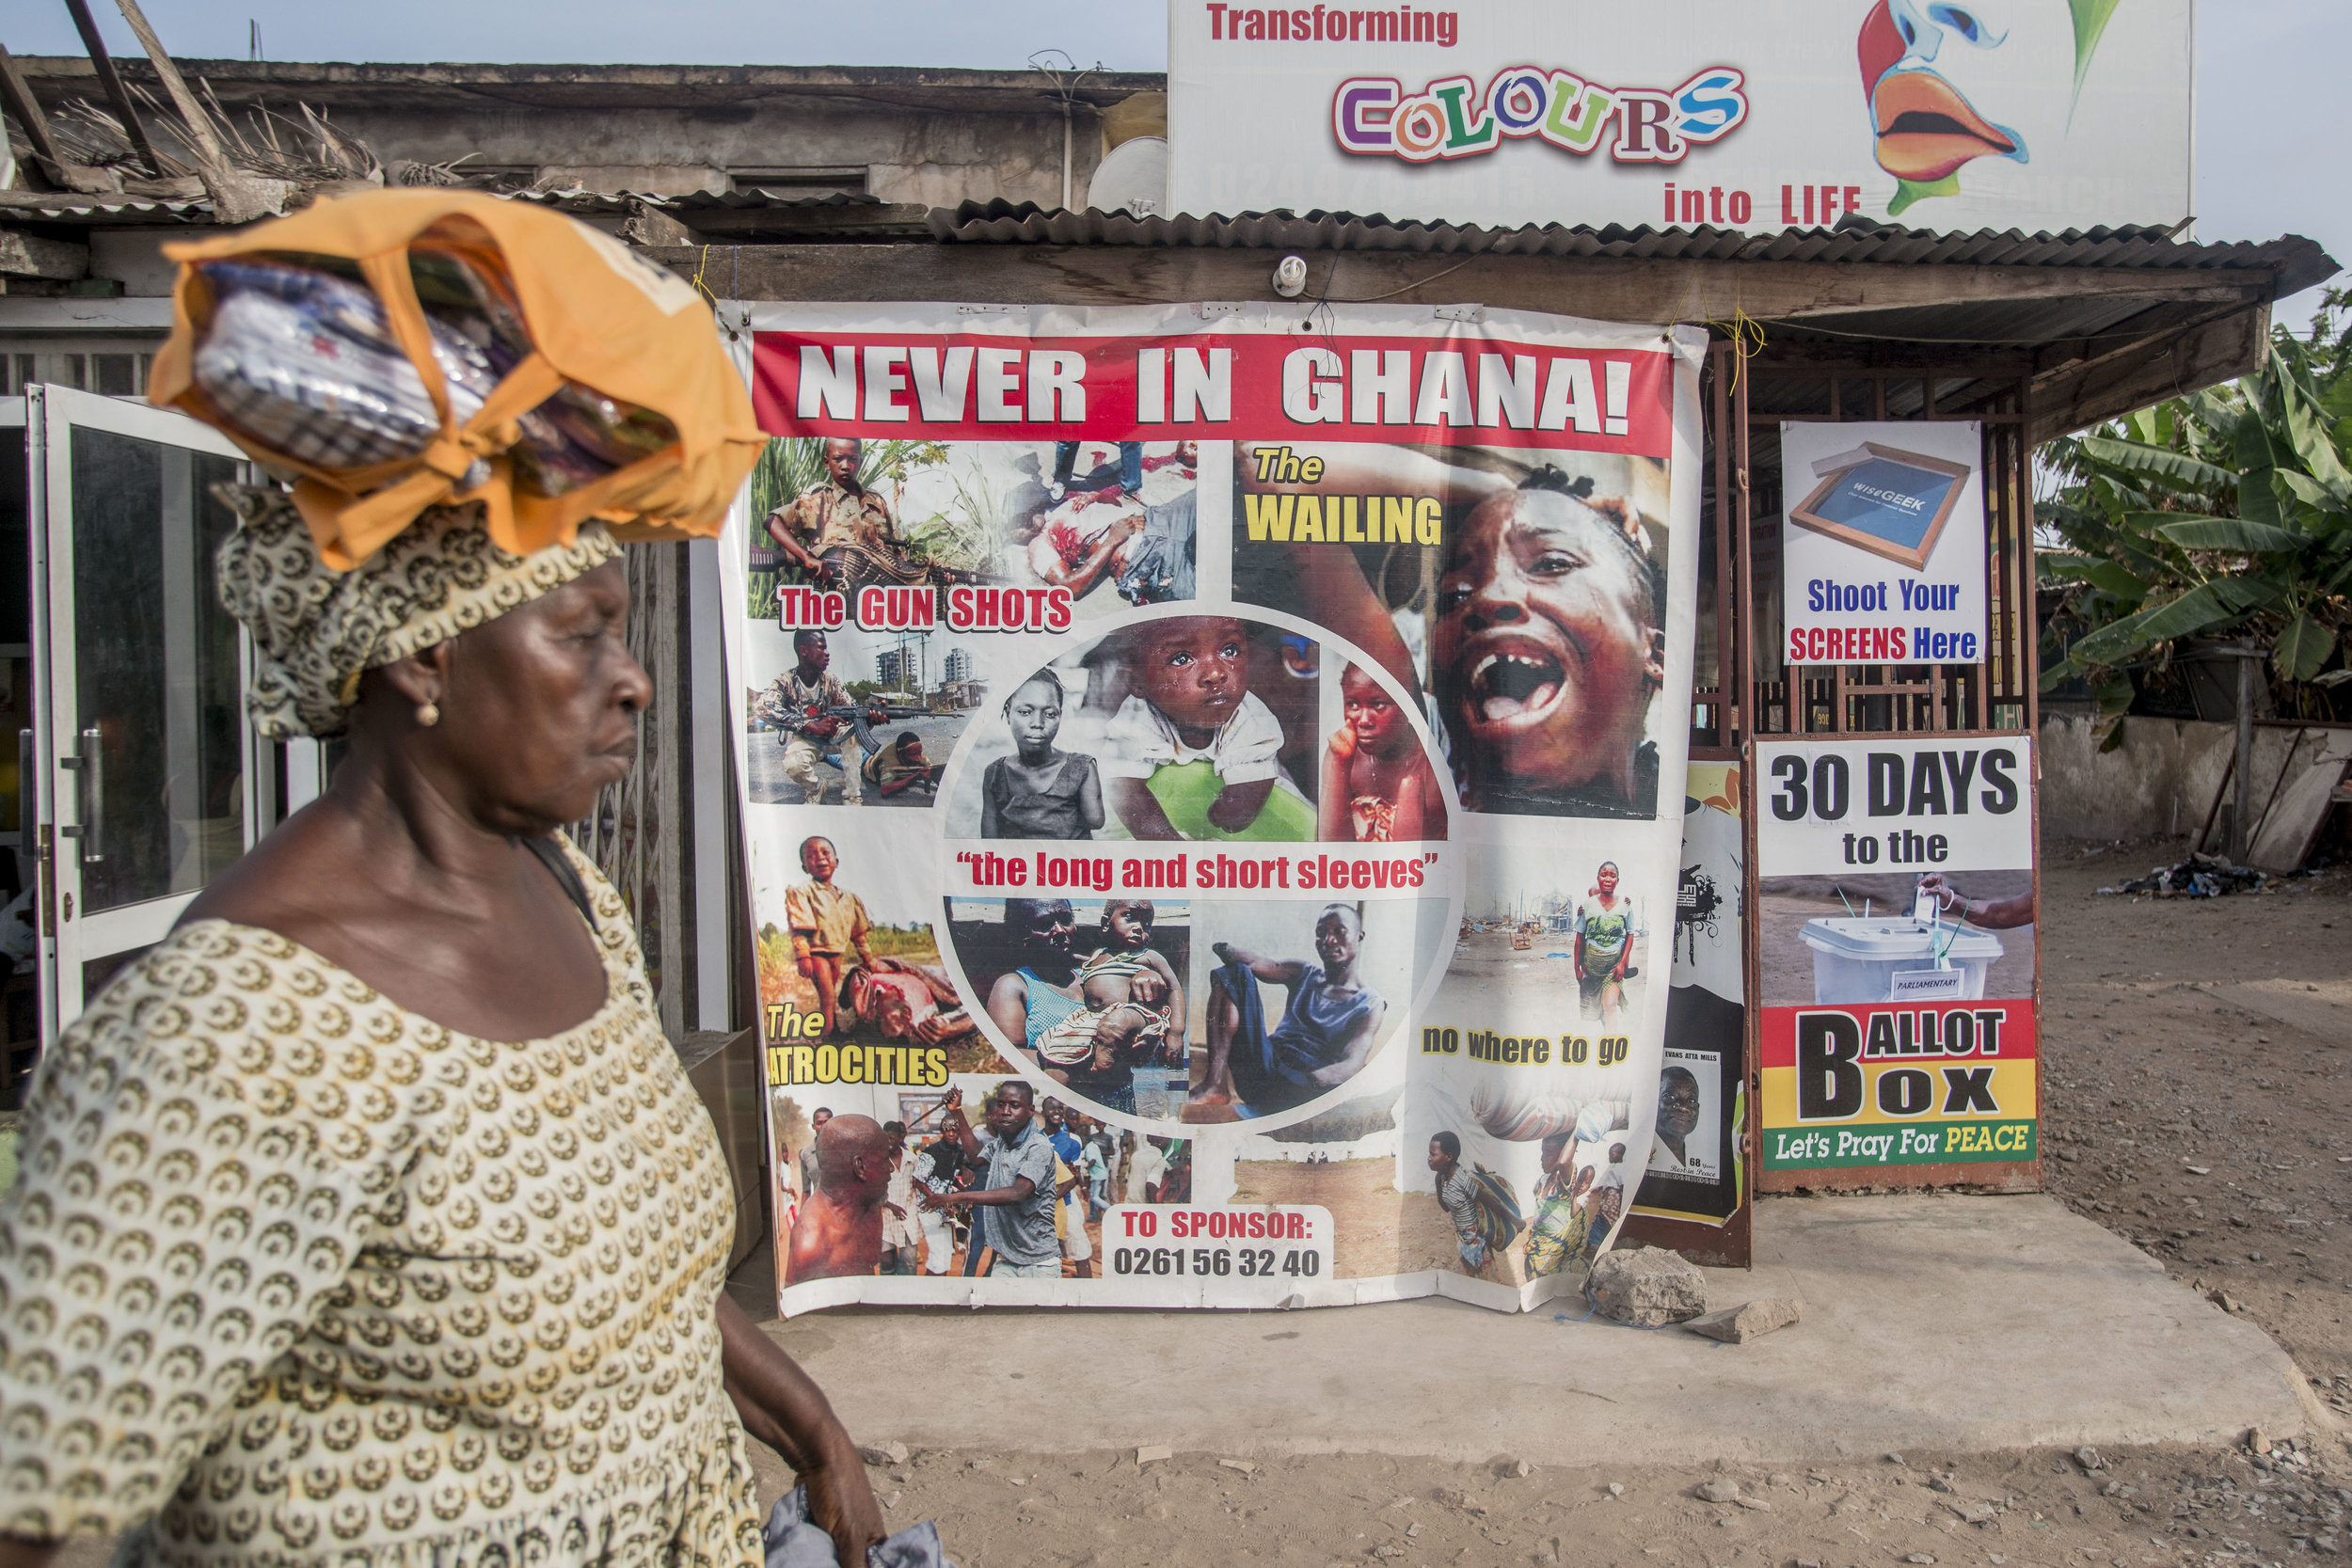  A woman pass by a billboard promoting the No Violence in Ghana. Being one of the oldest democracies in West Africa, Ghana prepares for the incoming general election on the 7th December. In various spots around the city of Accra countdowns for the el